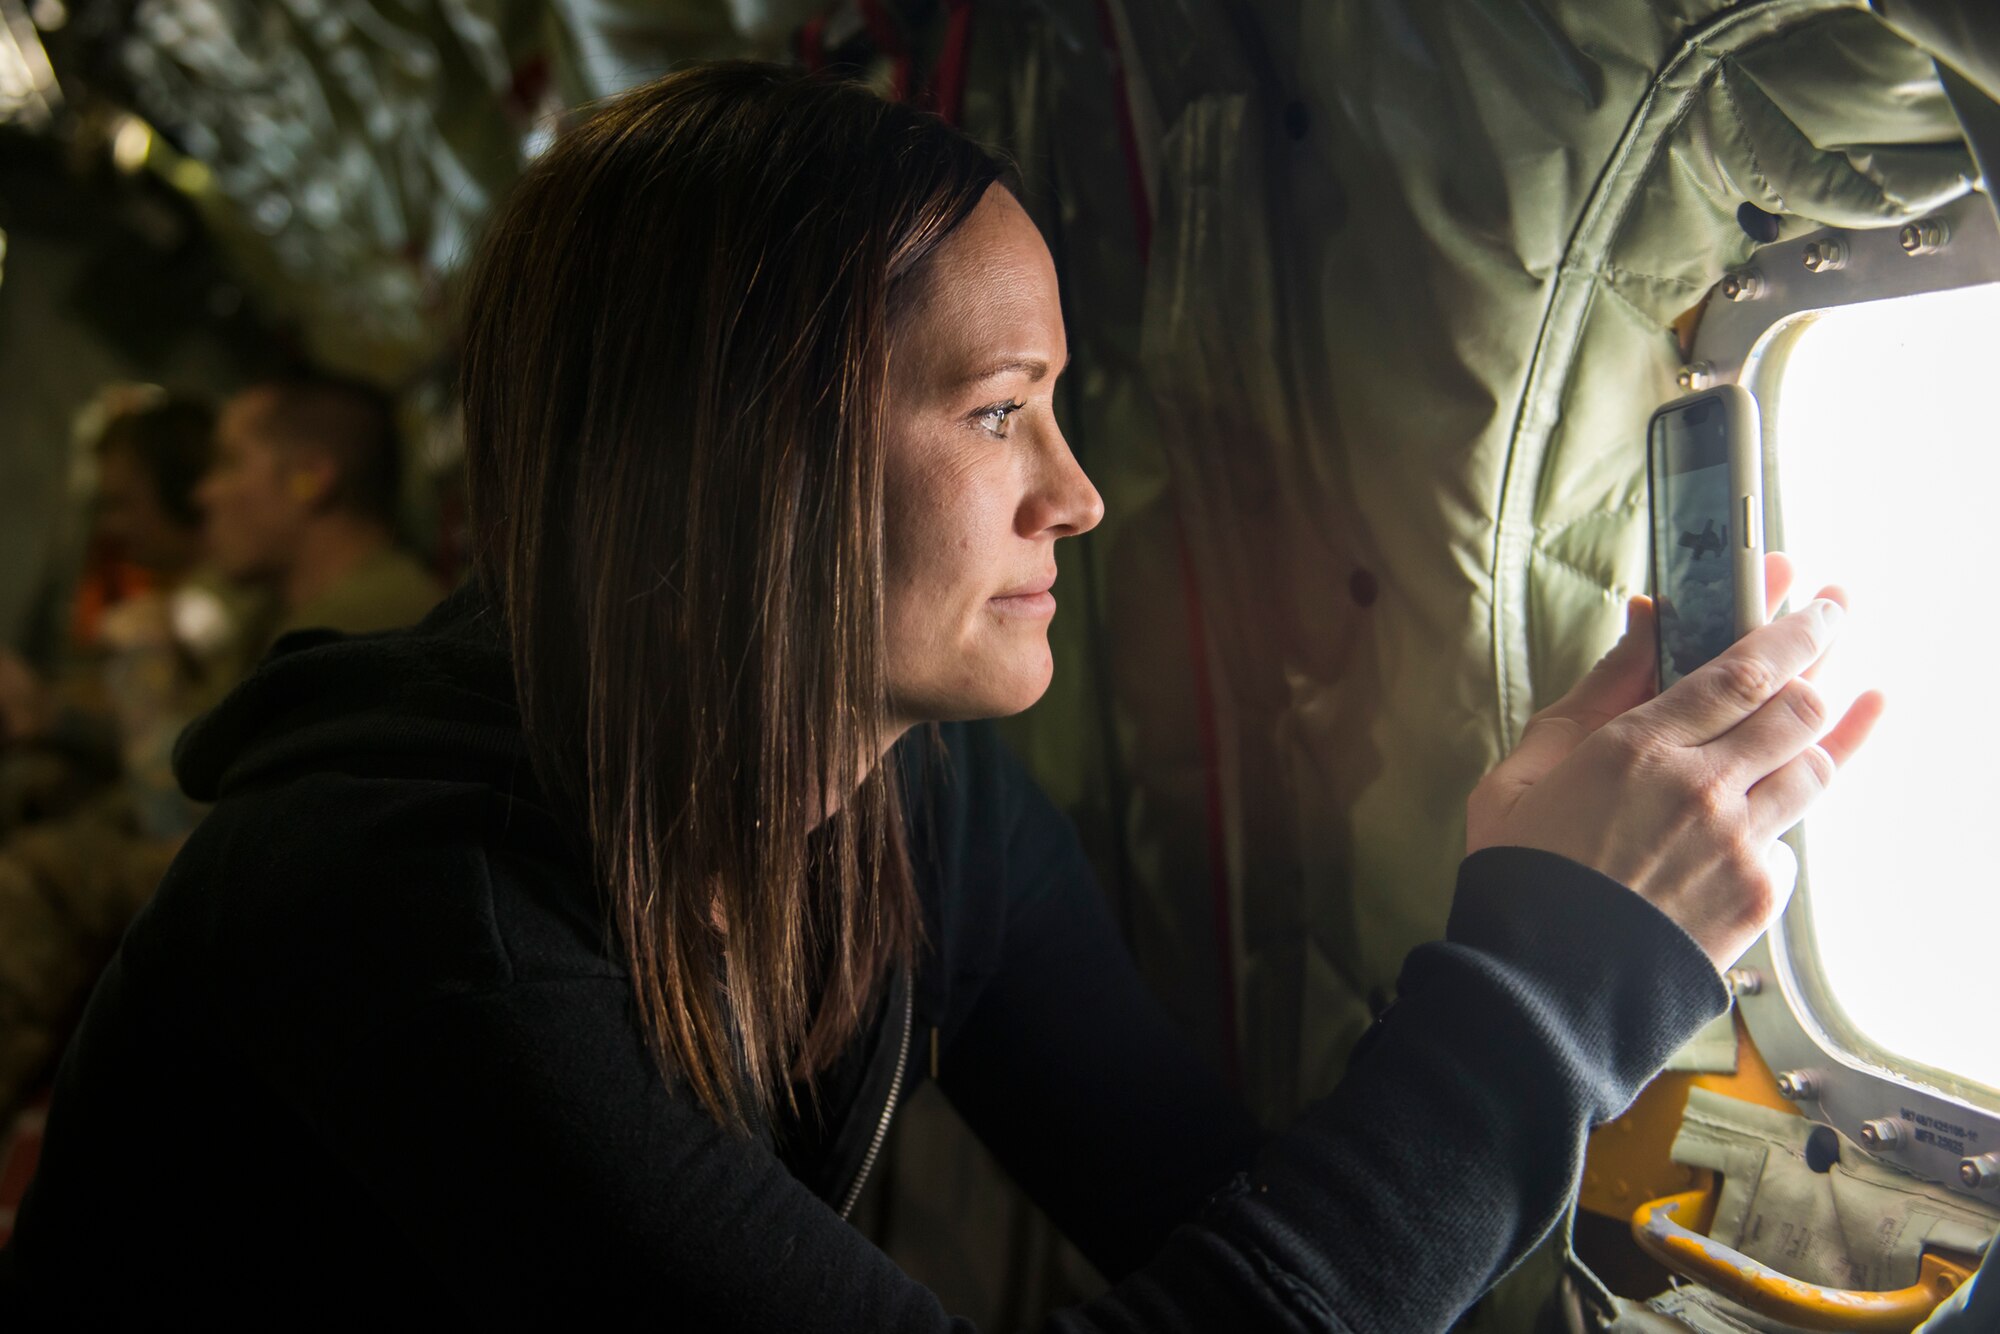 The wife of an Airman from the 124th Fighter Wing films an A-10 Thunderbolt || assigned to the 190th Fighter Squadron over Southwest Idaho, Dec. 7, 2019. The Idaho and Utah Air National Guard units collaborated to support an in-flight refueling experience for the spouses. (U.S. Air National Guard photo by Airman 1st Class Taylor Walker)